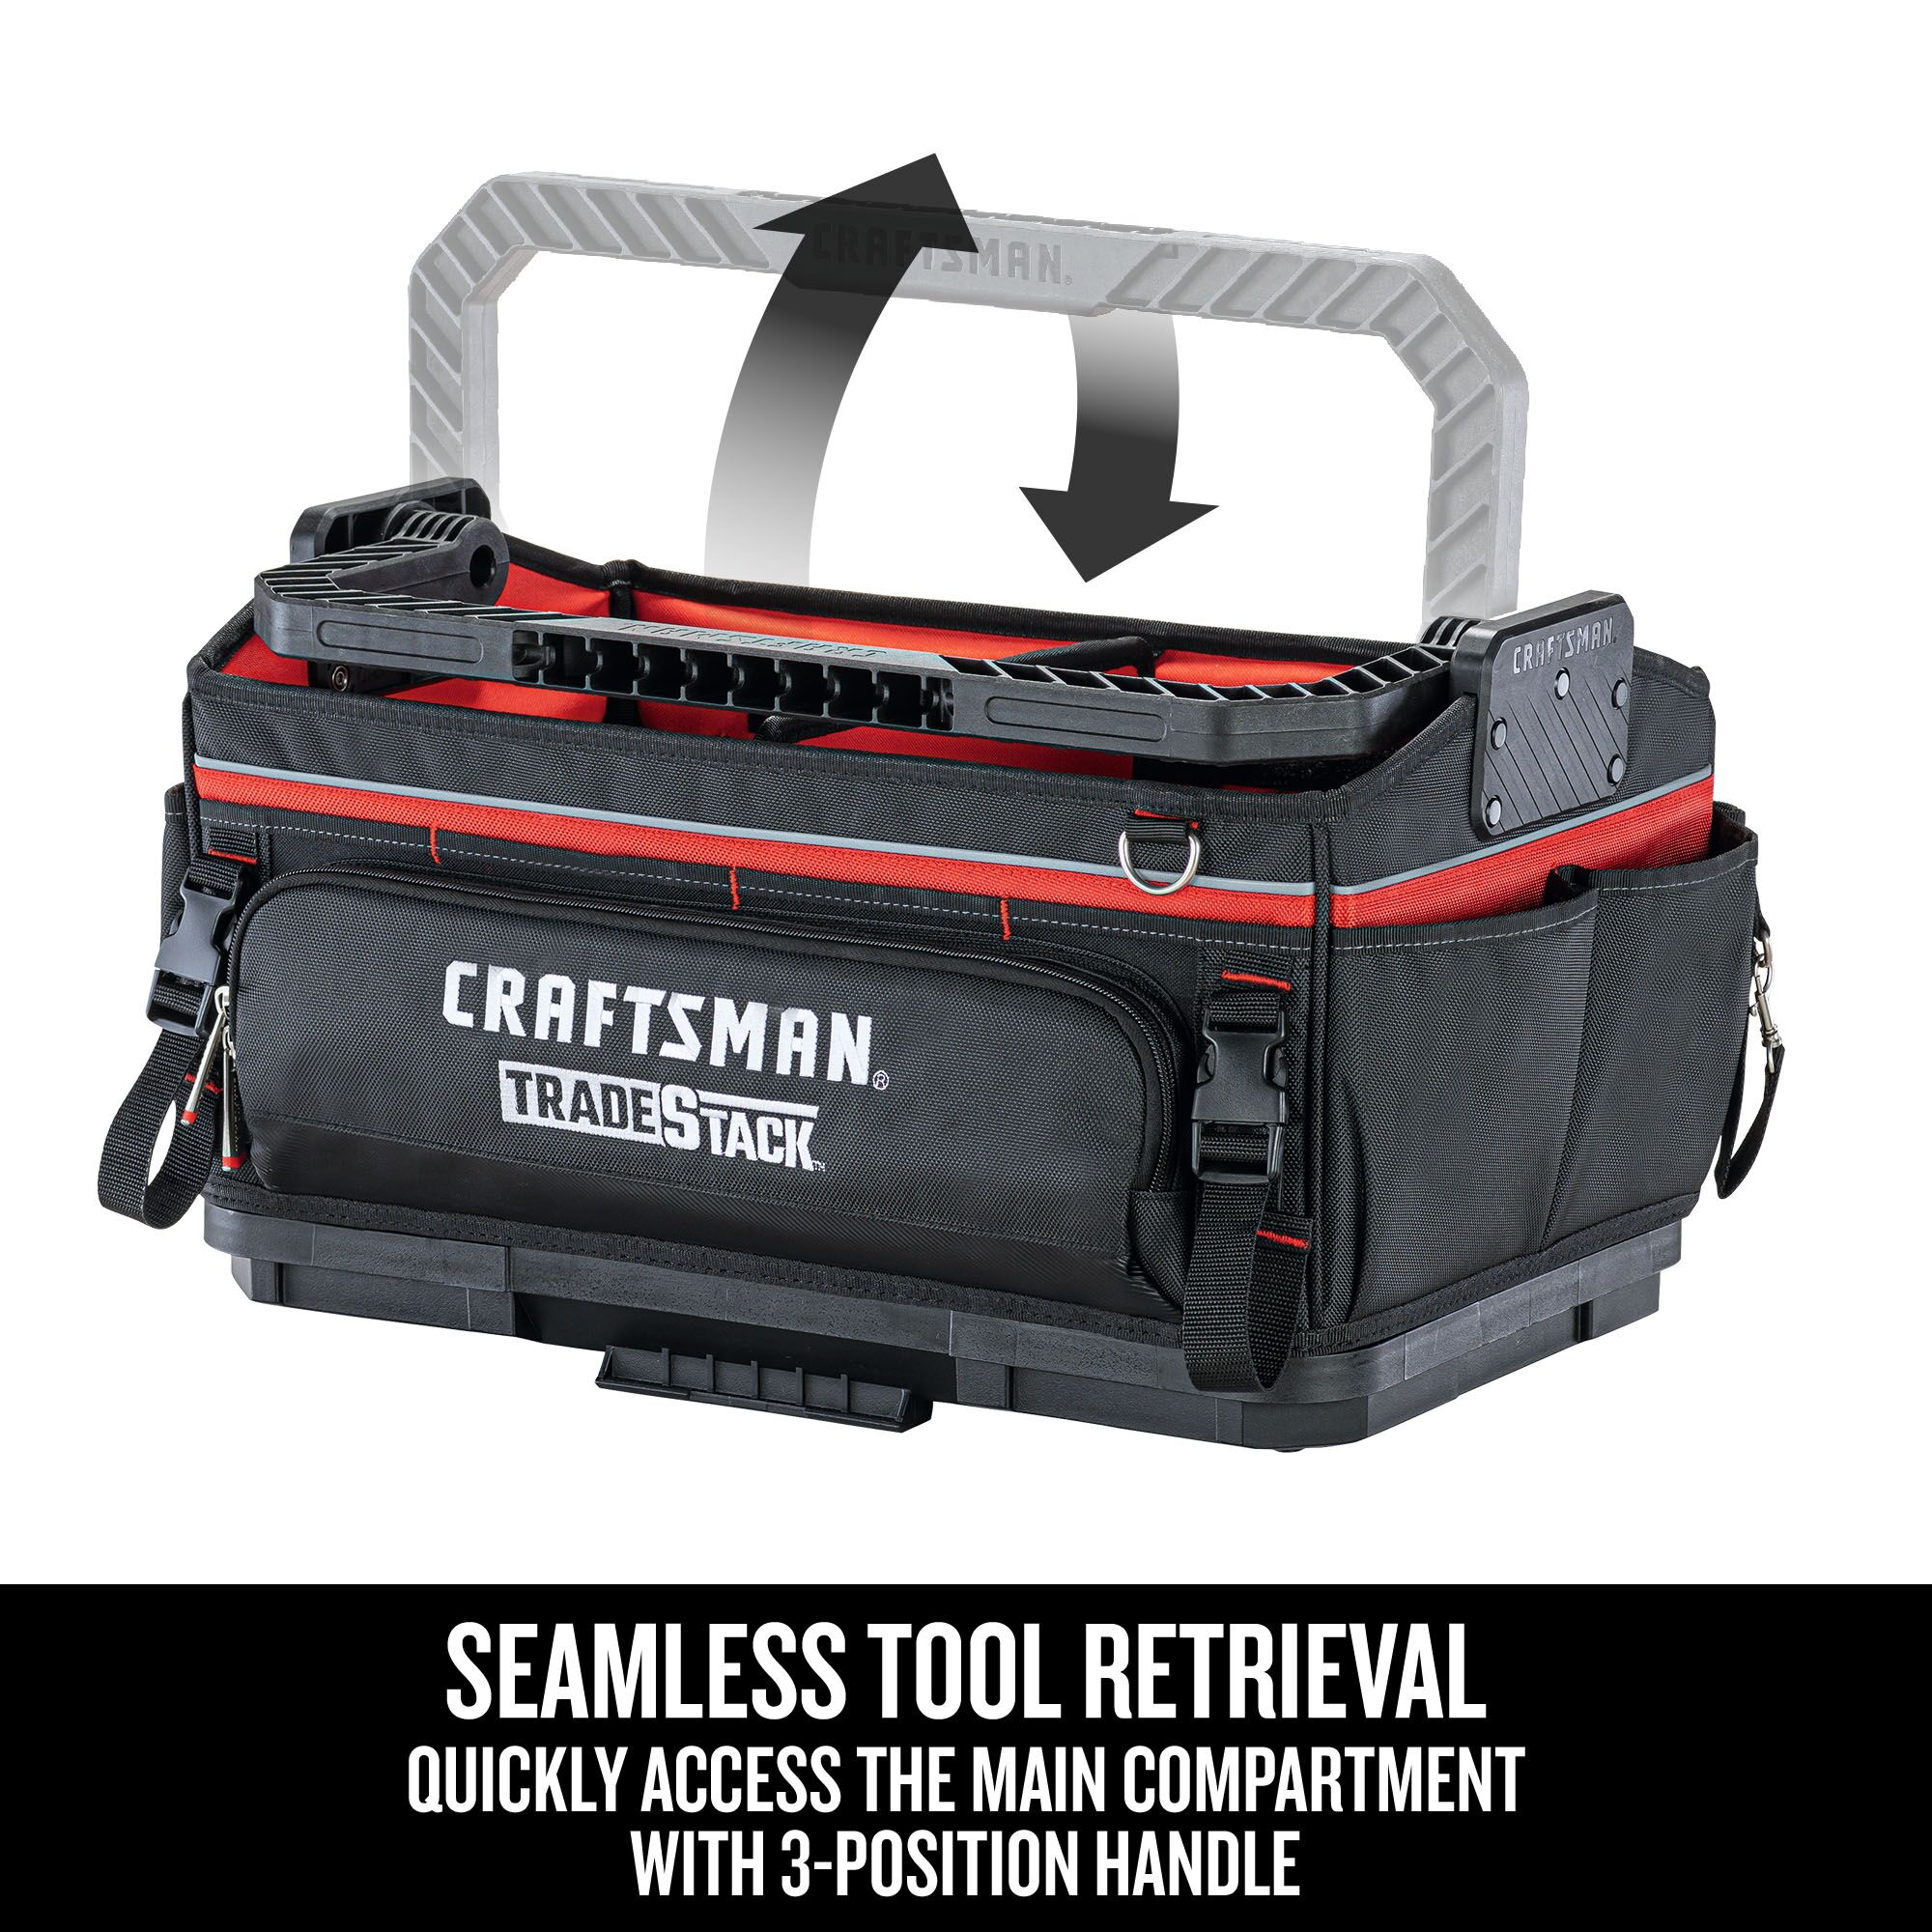 Seamless tool retrieval, quickly access the main compartment with 3-position handle